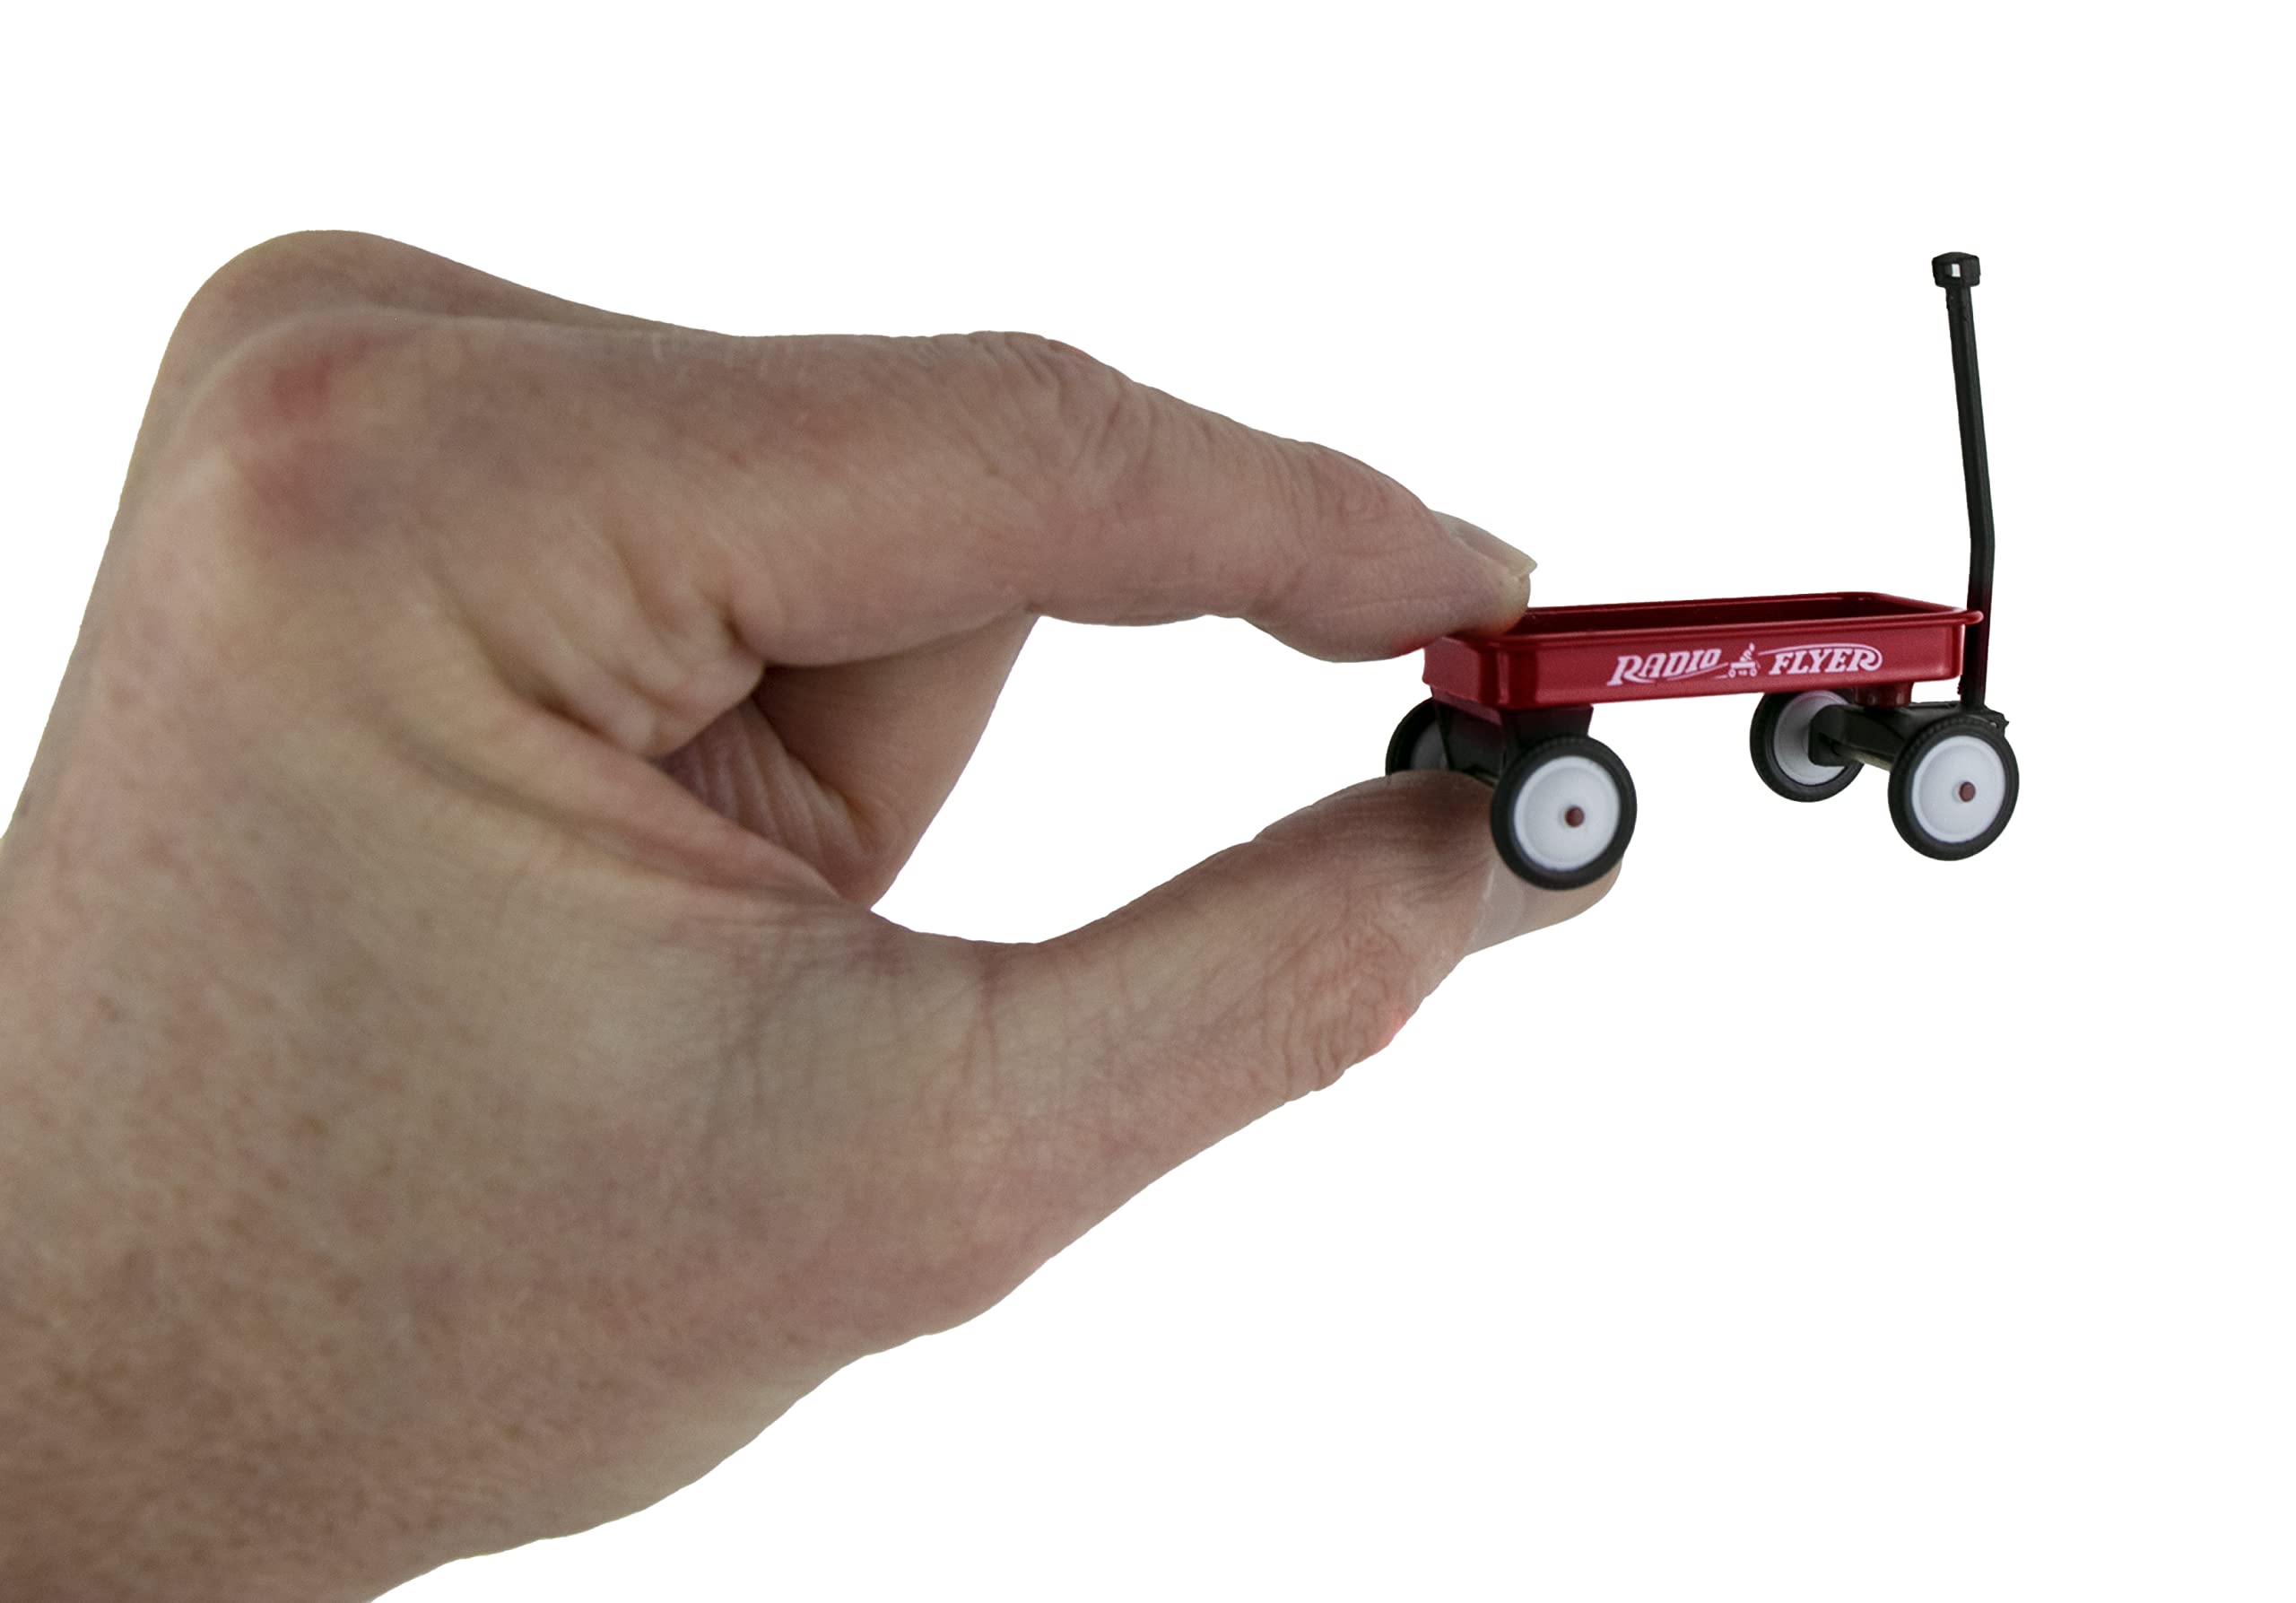 Worlds Smallest Radio Flyer Classic Red Wagon